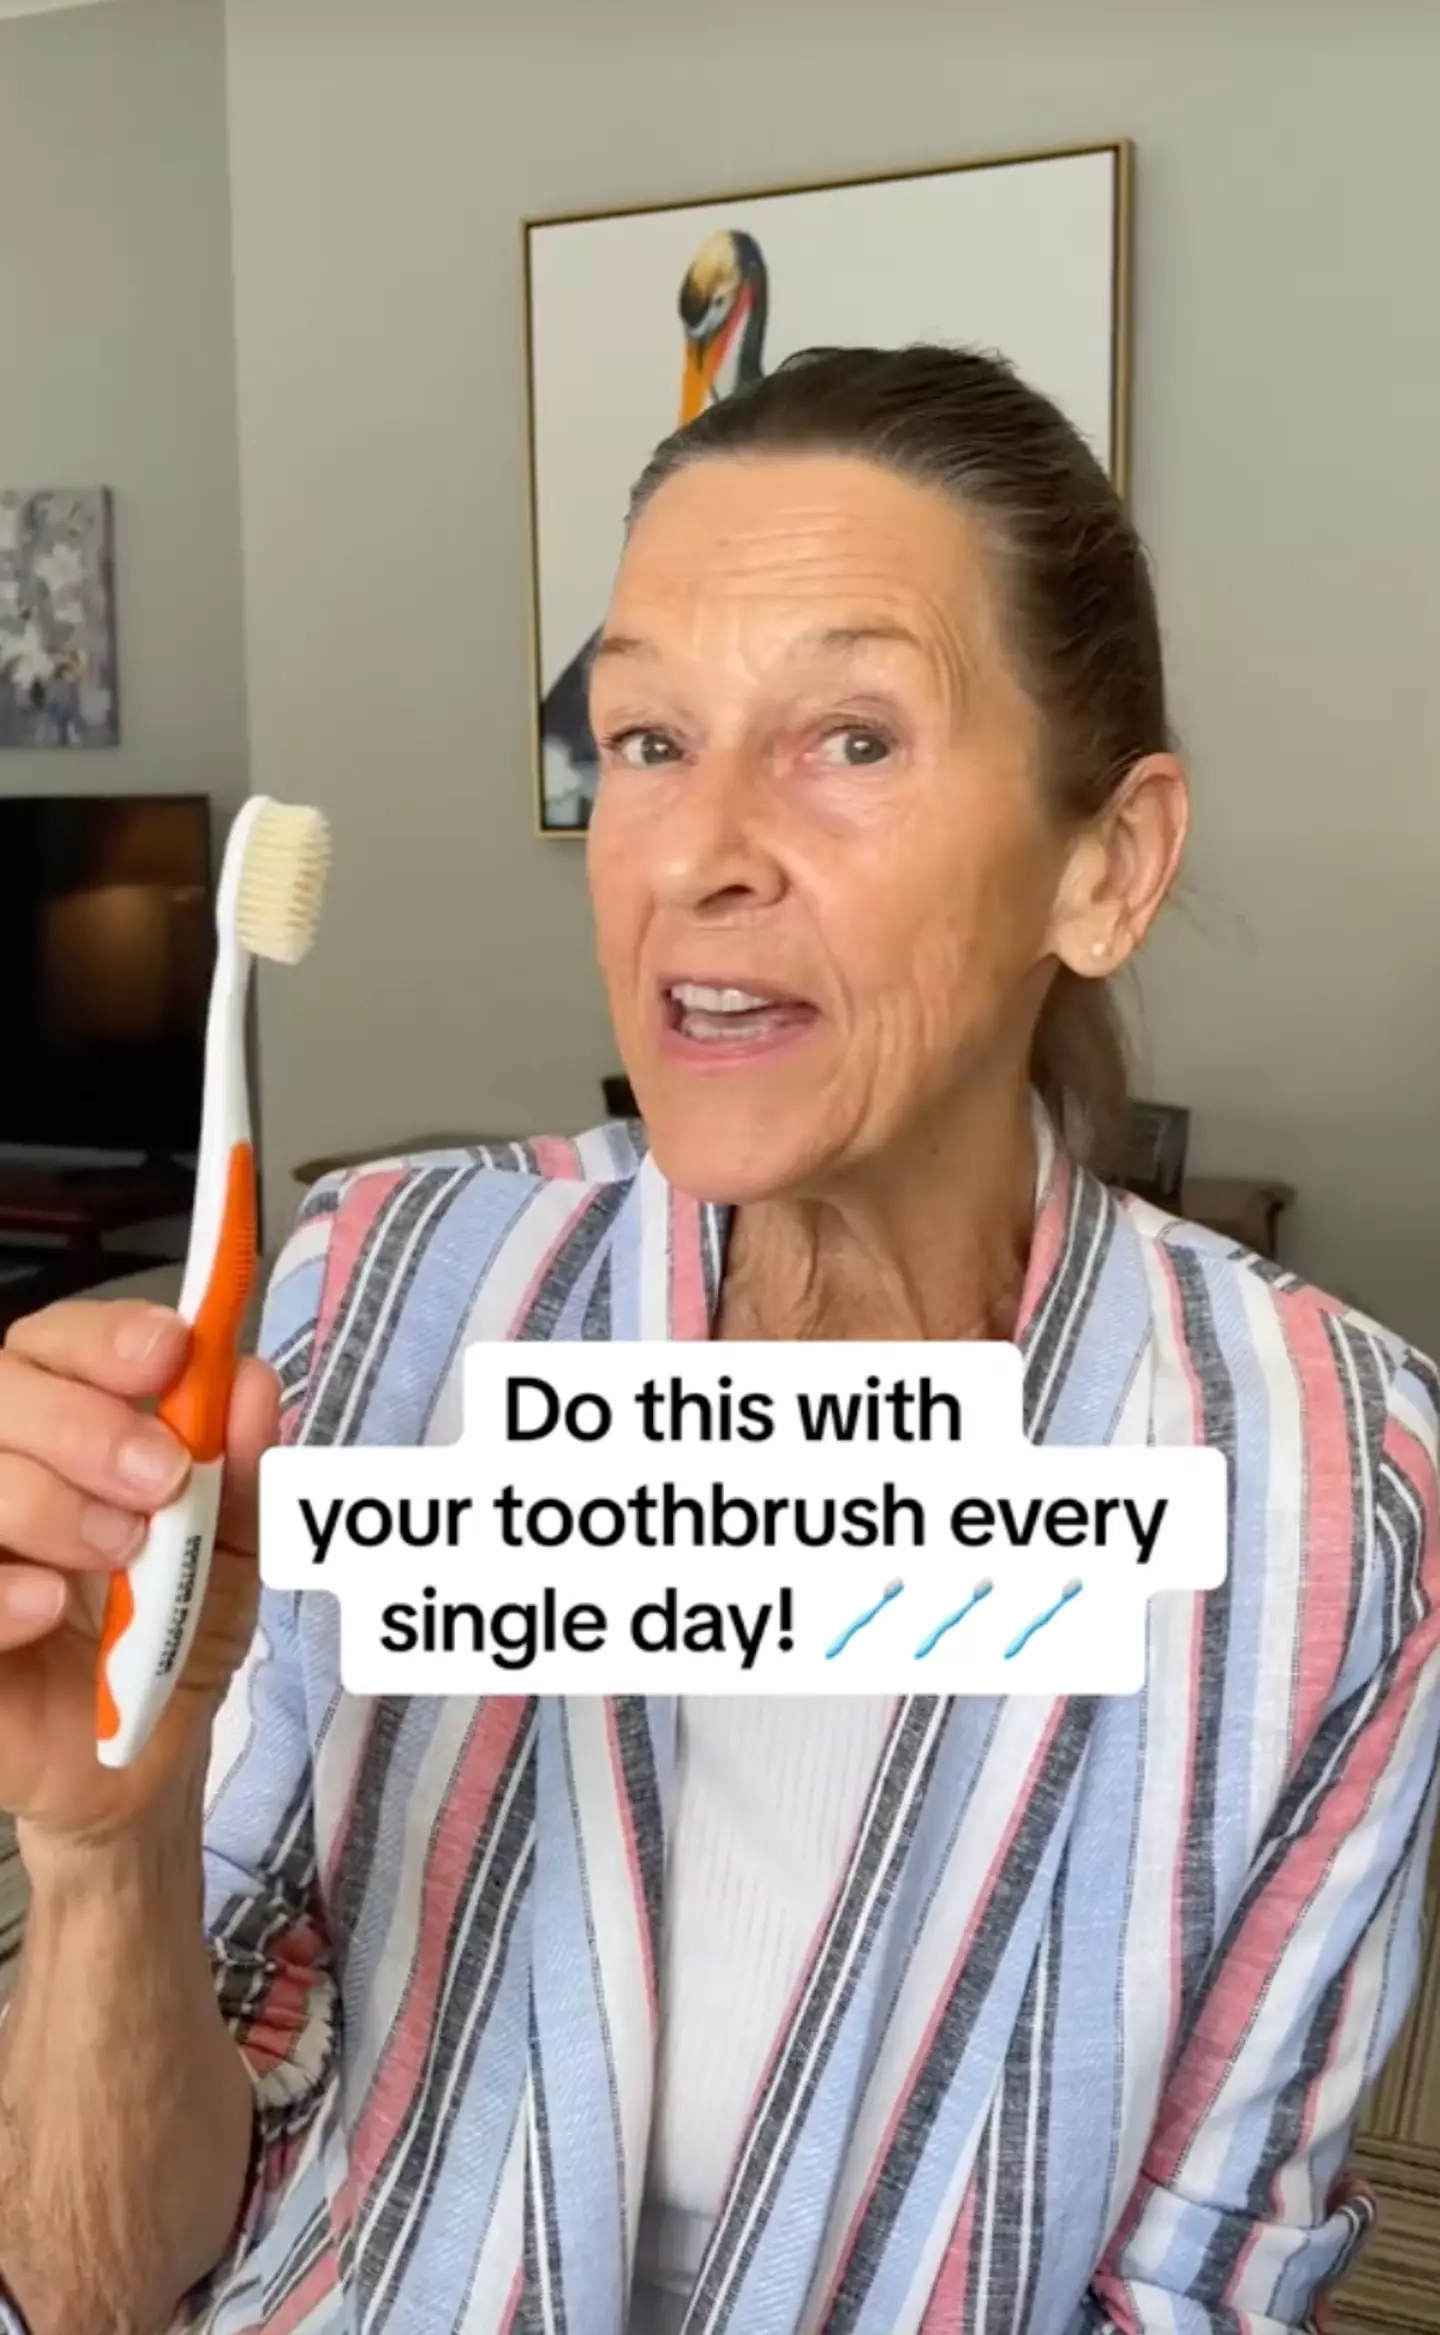 The dentist says you should have two toothbrushes.